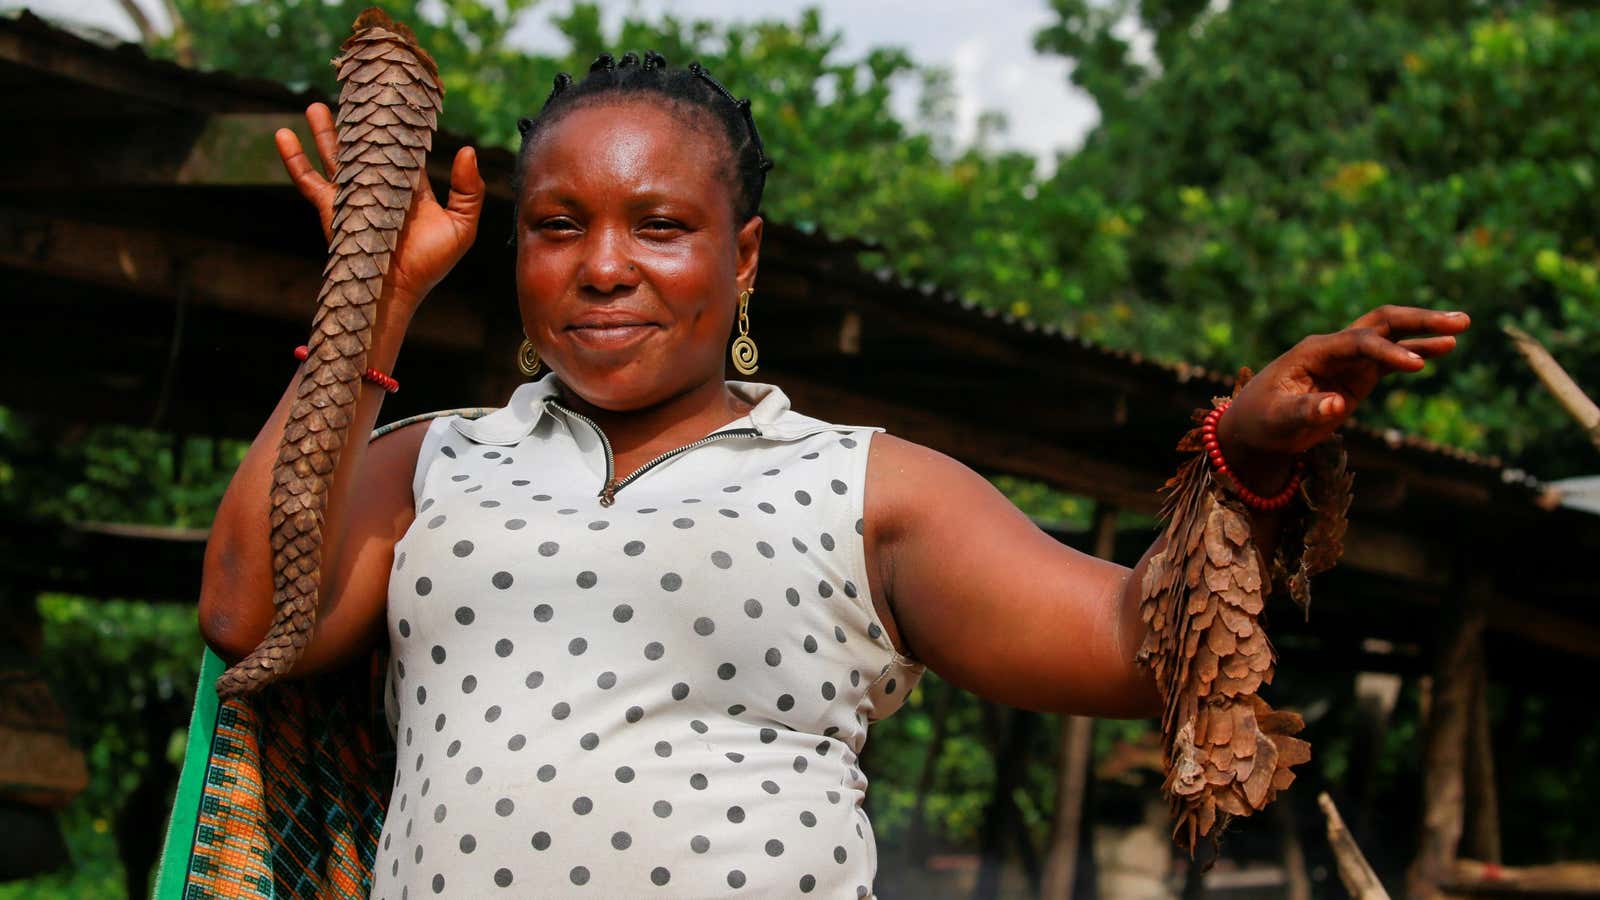 A bushmeat seller poses with scales of pangolin at a bushmeat market in Ondo, Nigeria